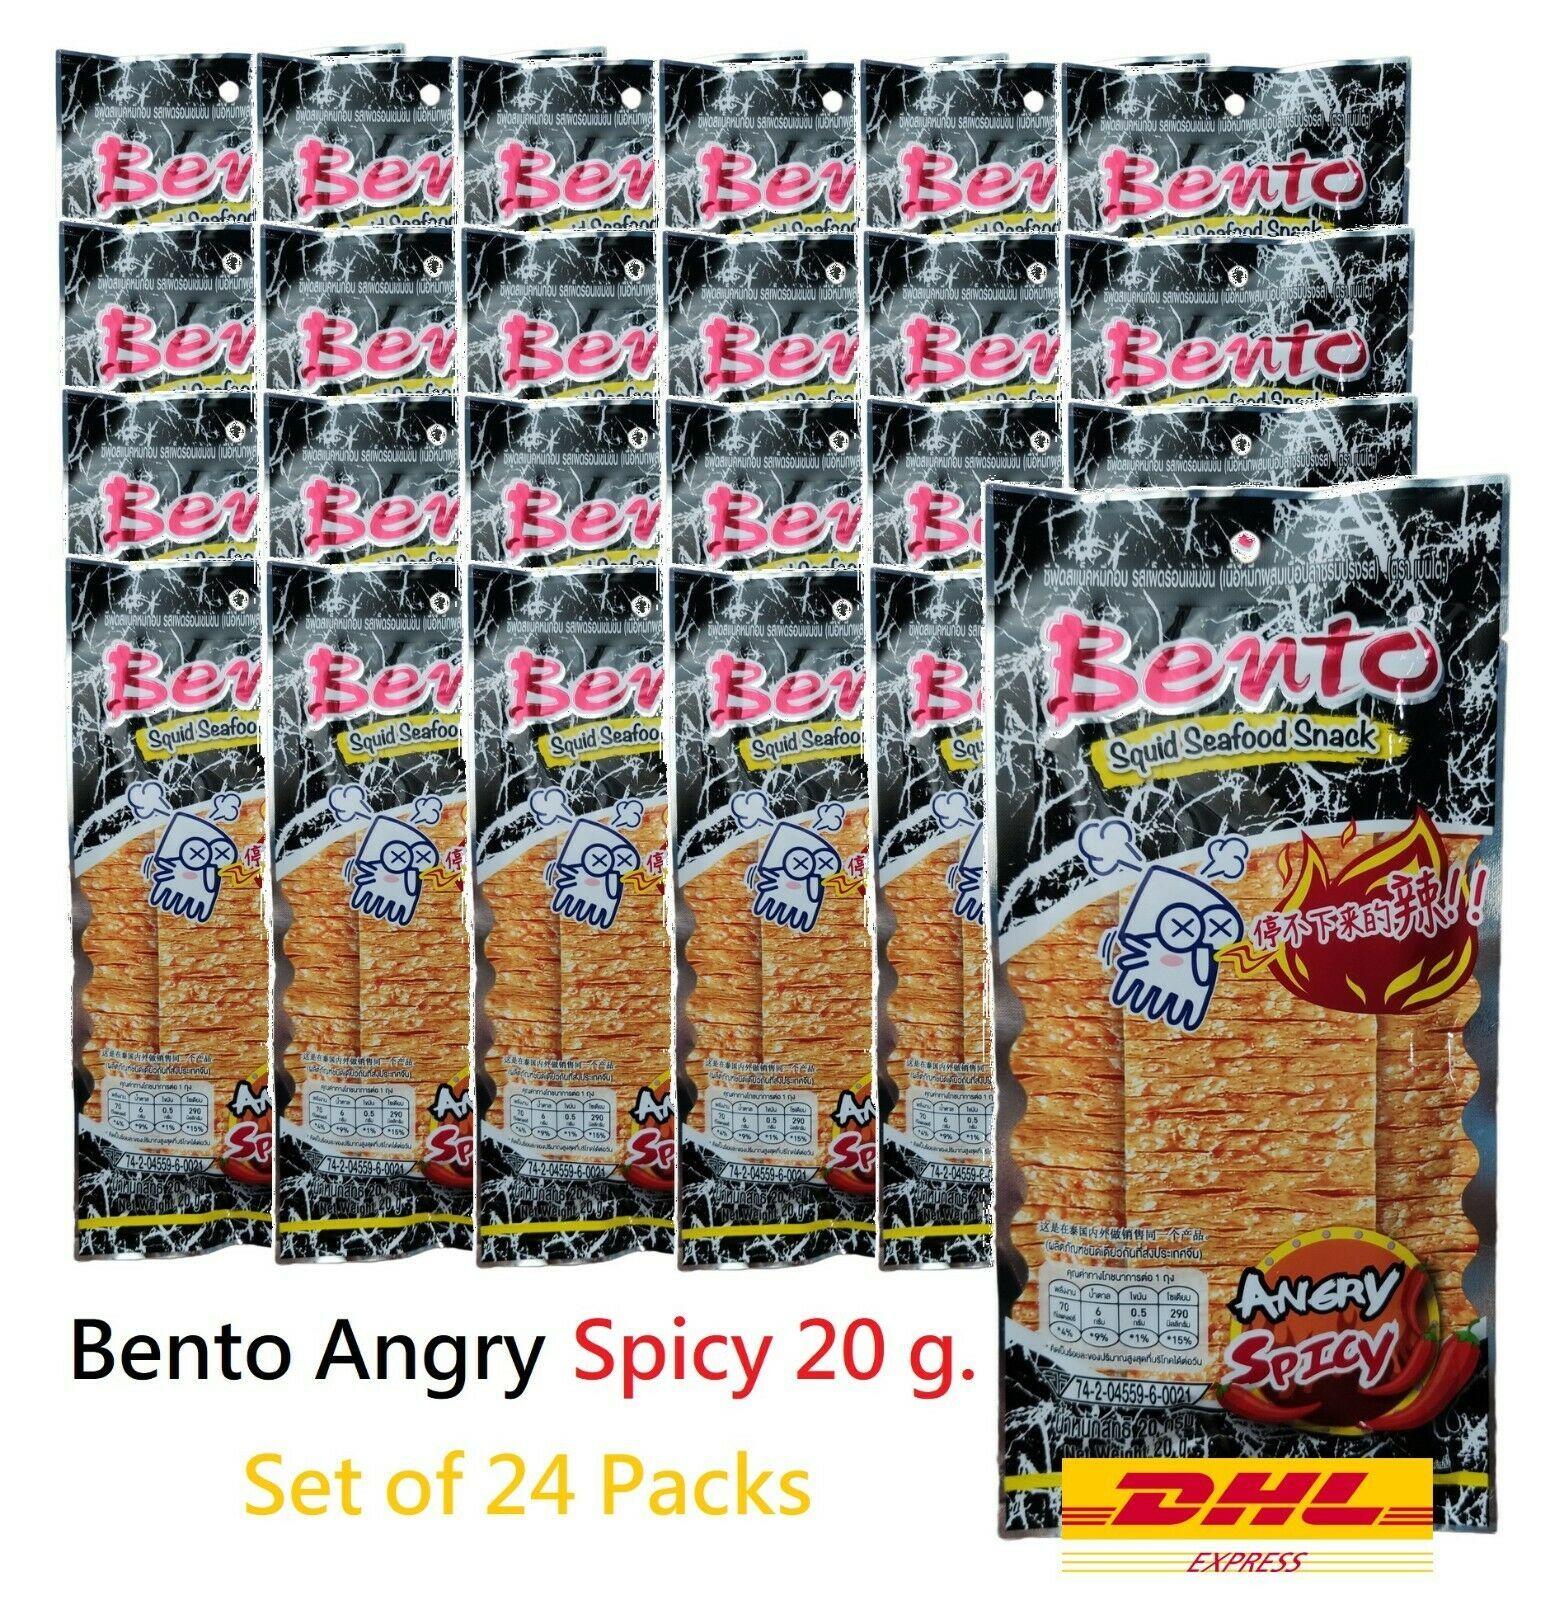 x24 BENTO SQUID SEAFOOD SNACK ANGRY SPICY Flavour 20g THAI DELICIOUS